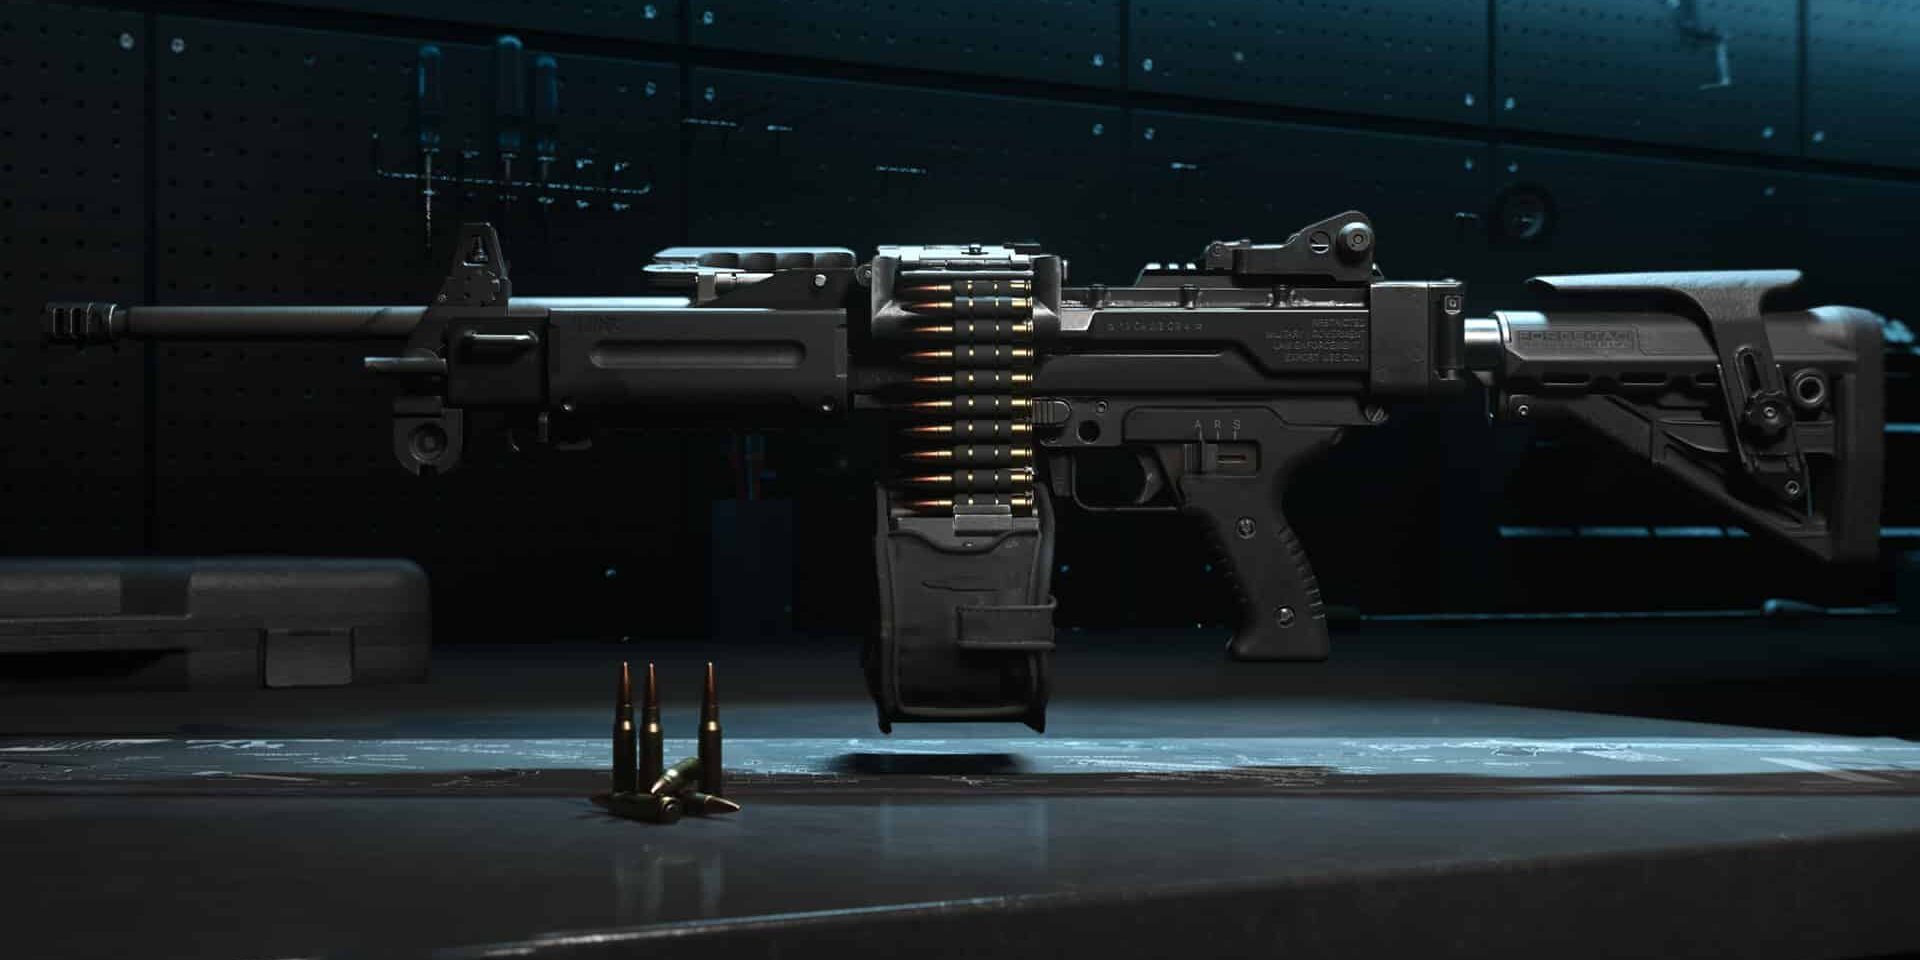 The best Warzone 2 guns and how to unlock them